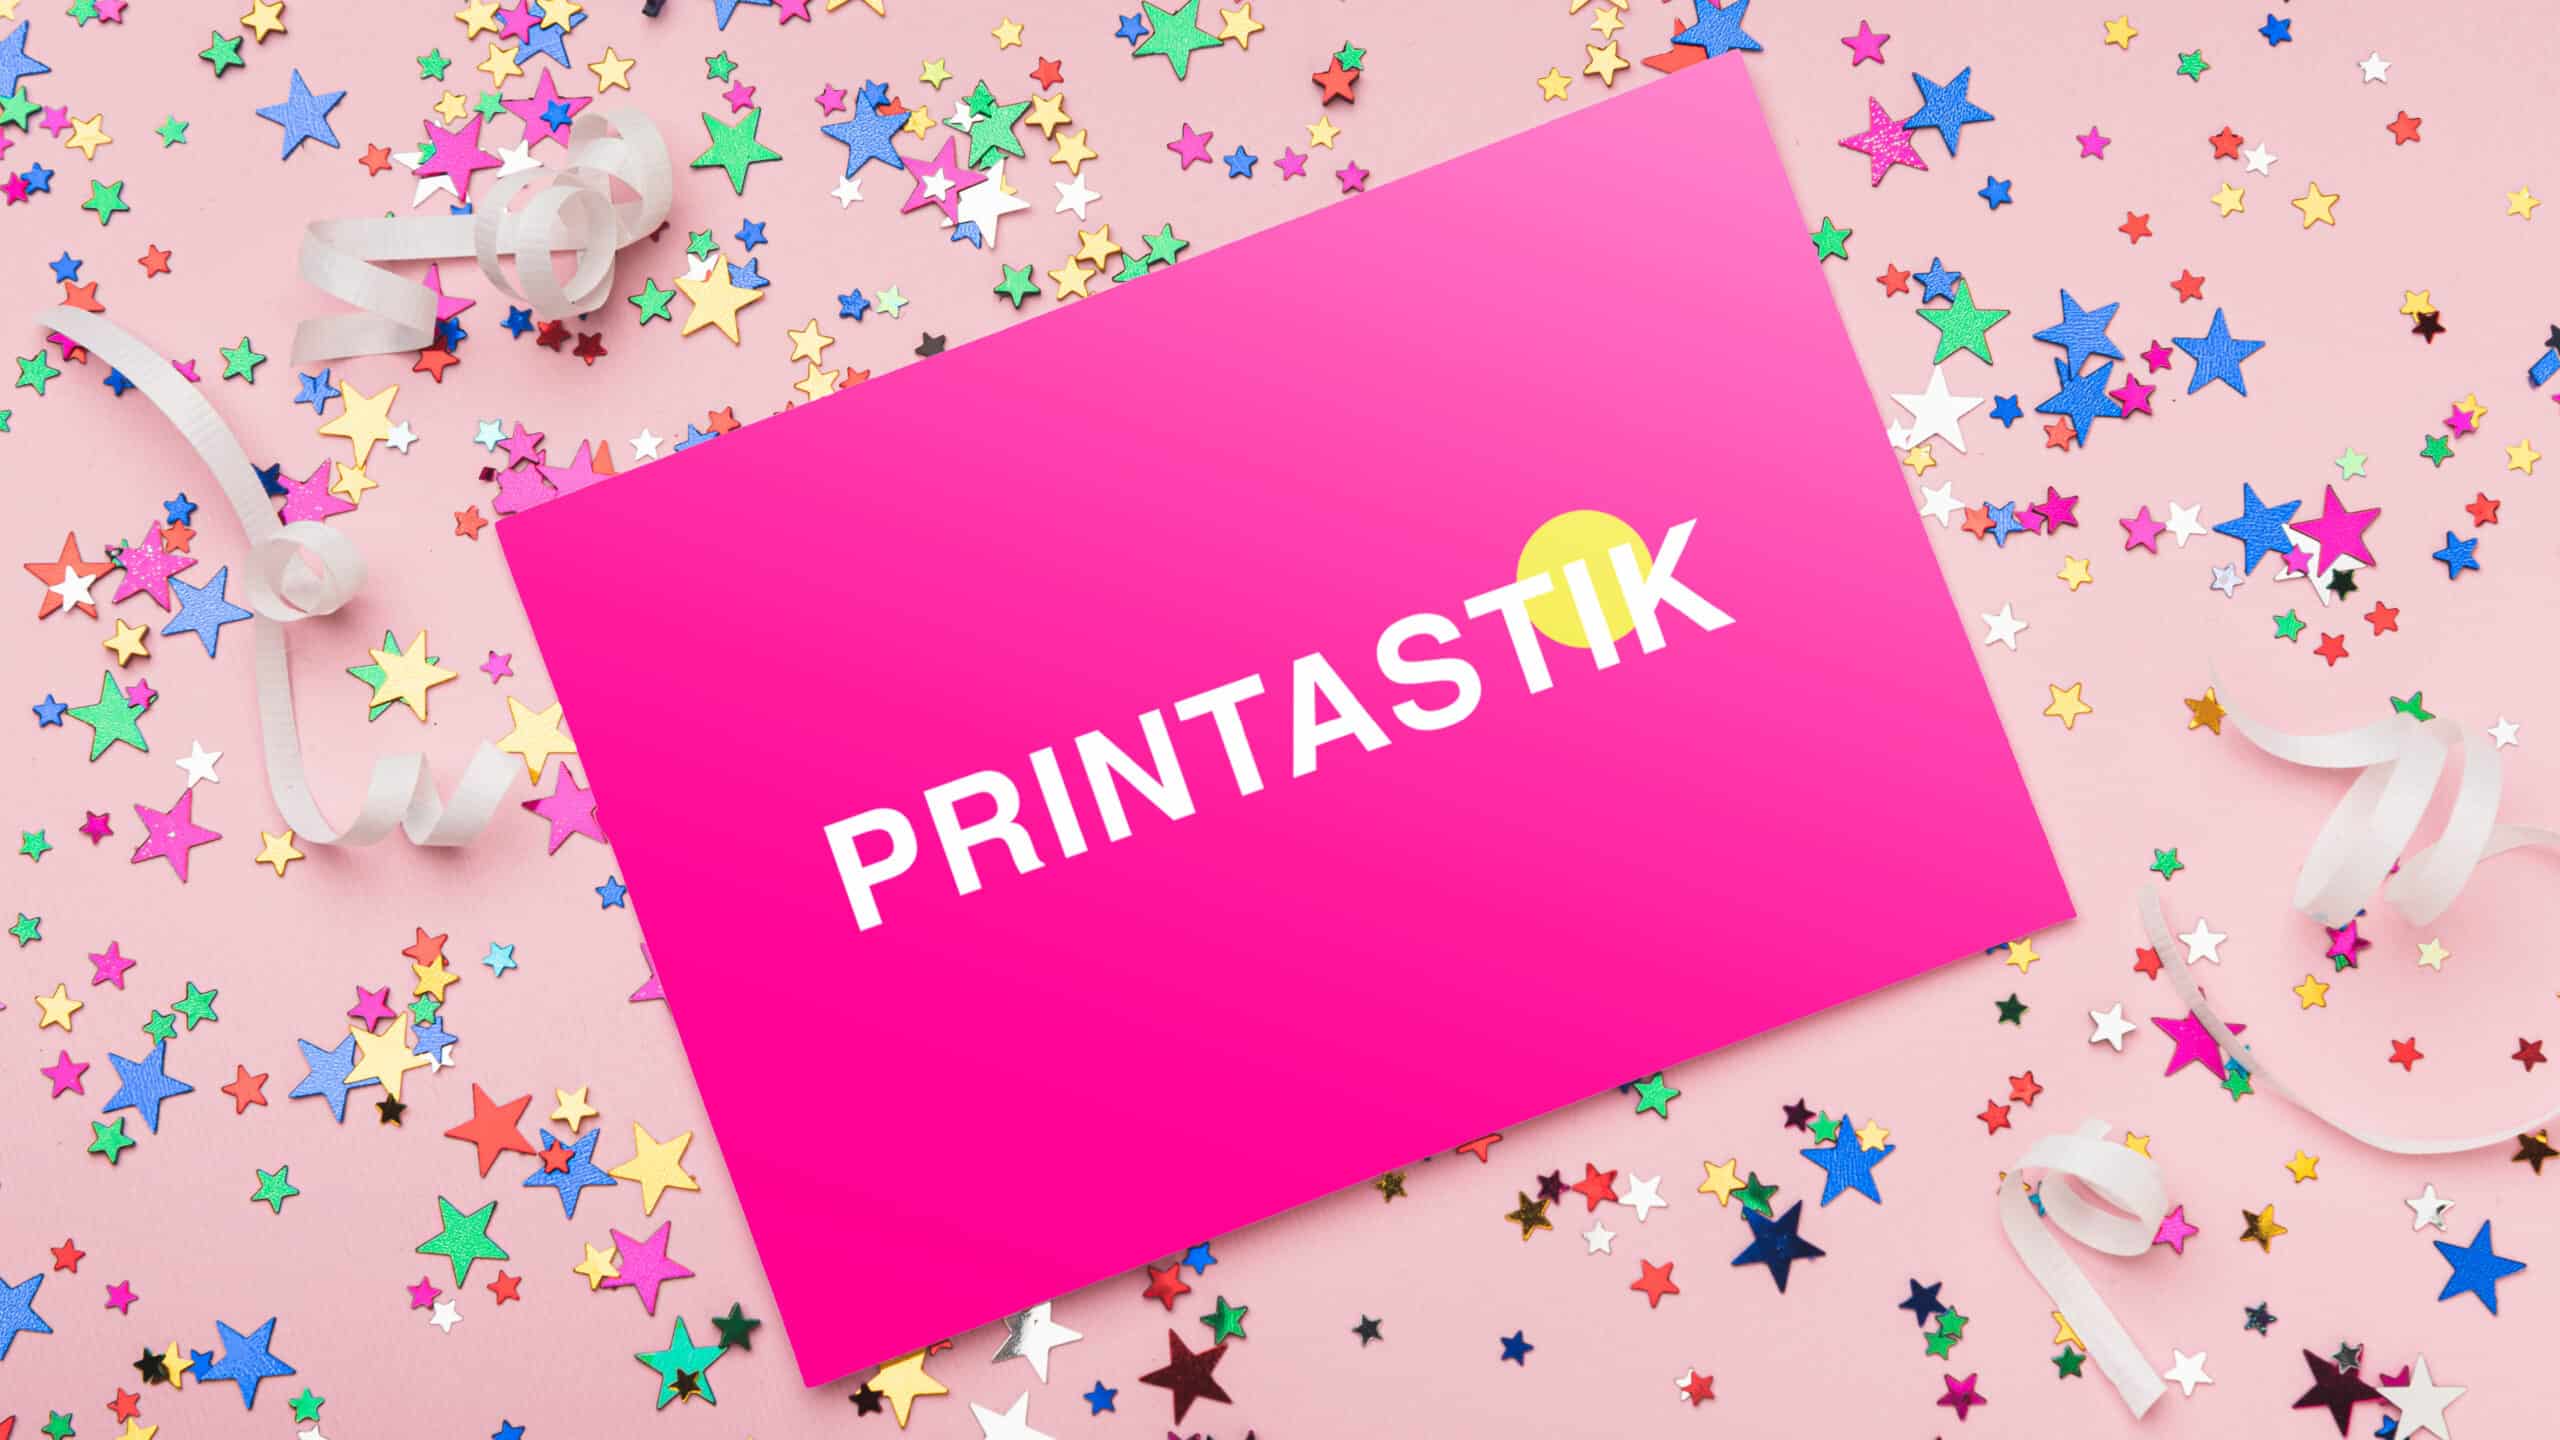 Pink Printastik branded notecard with confetti background